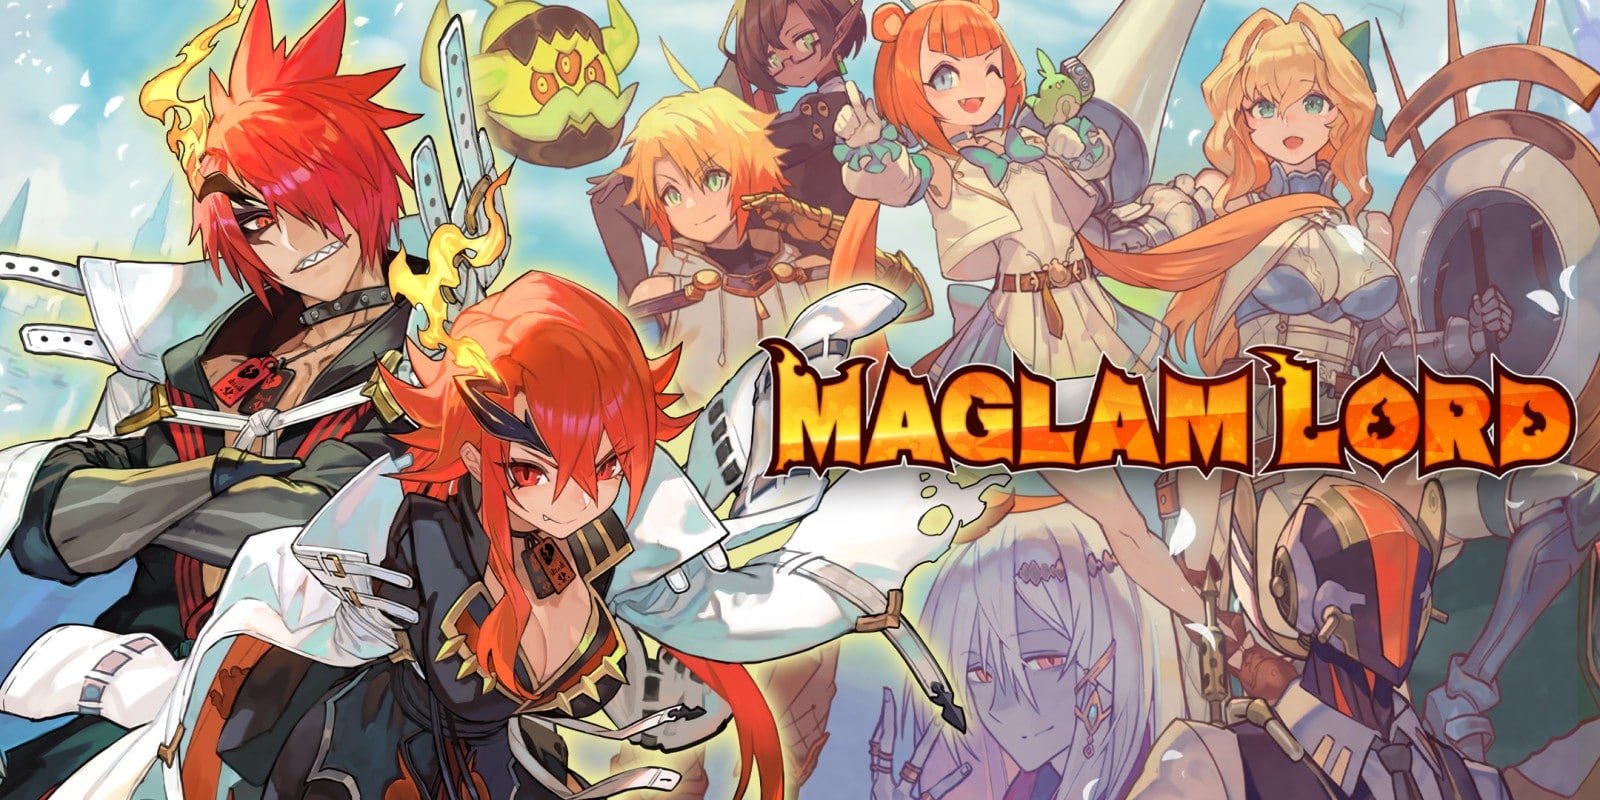 Maglam lord cover art